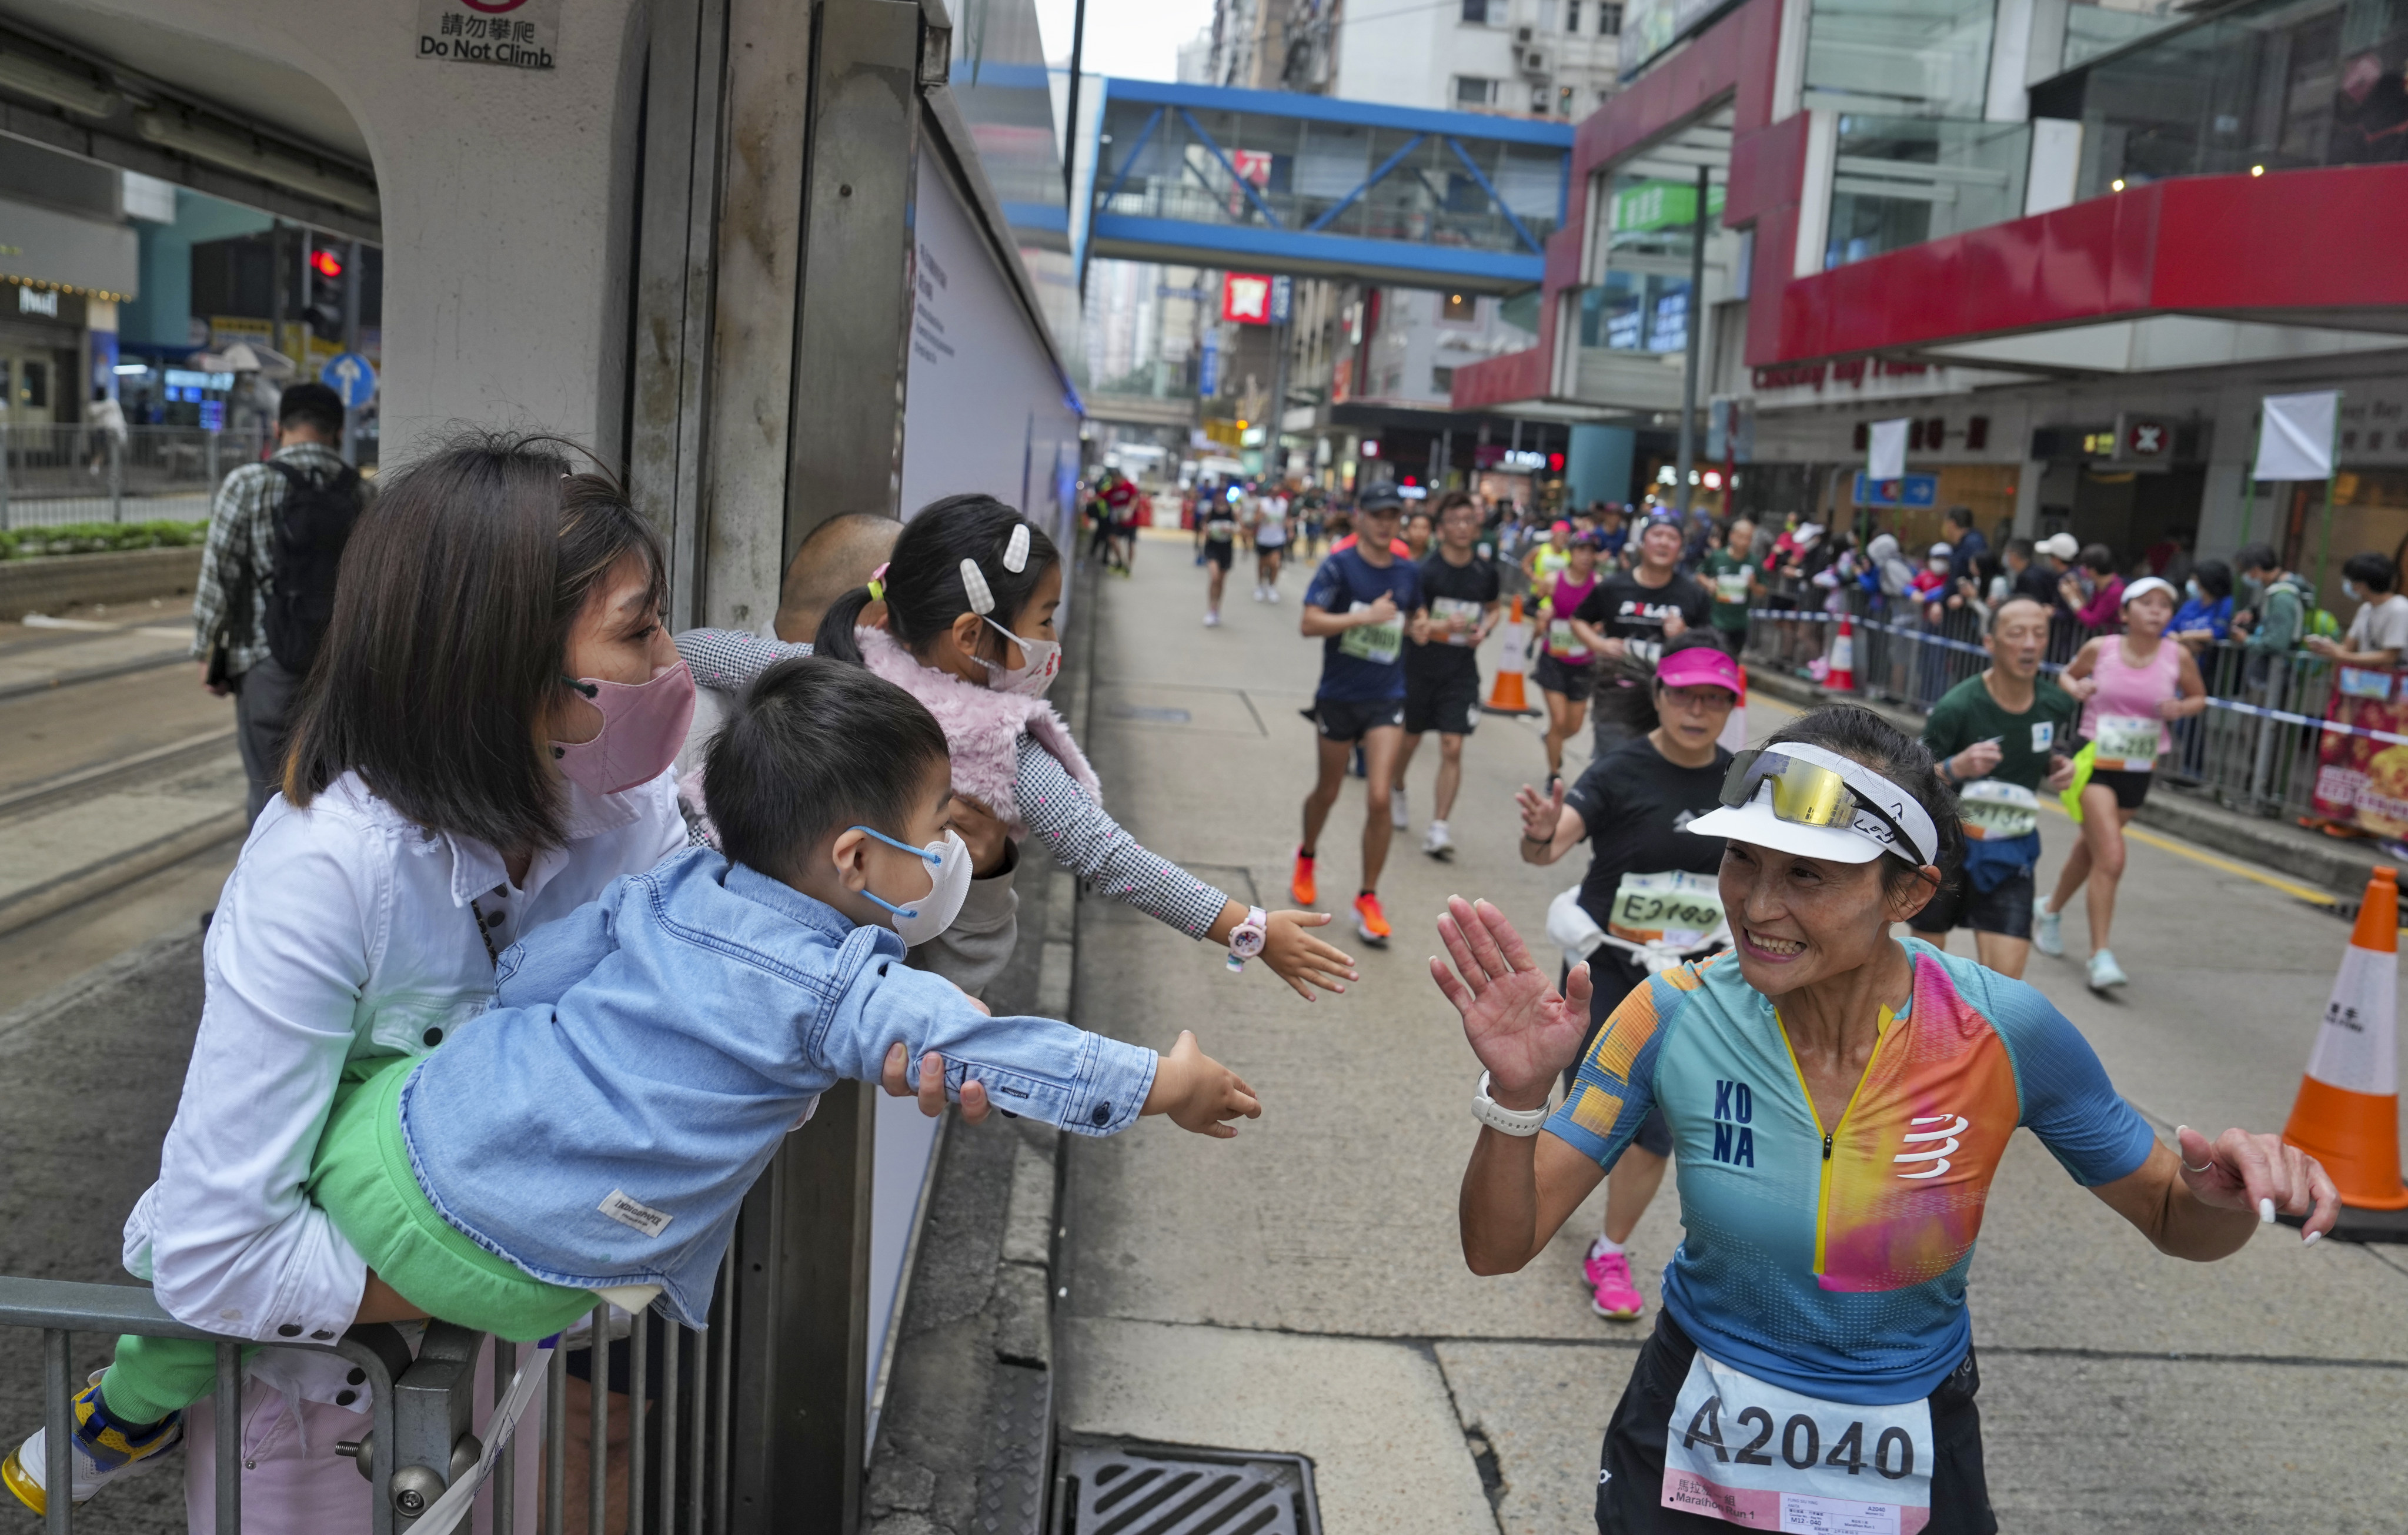 Supporters wearing masks greet runners during the Standard Chartered Hong Kong Marathon on Sunday. Photo: Elson Li